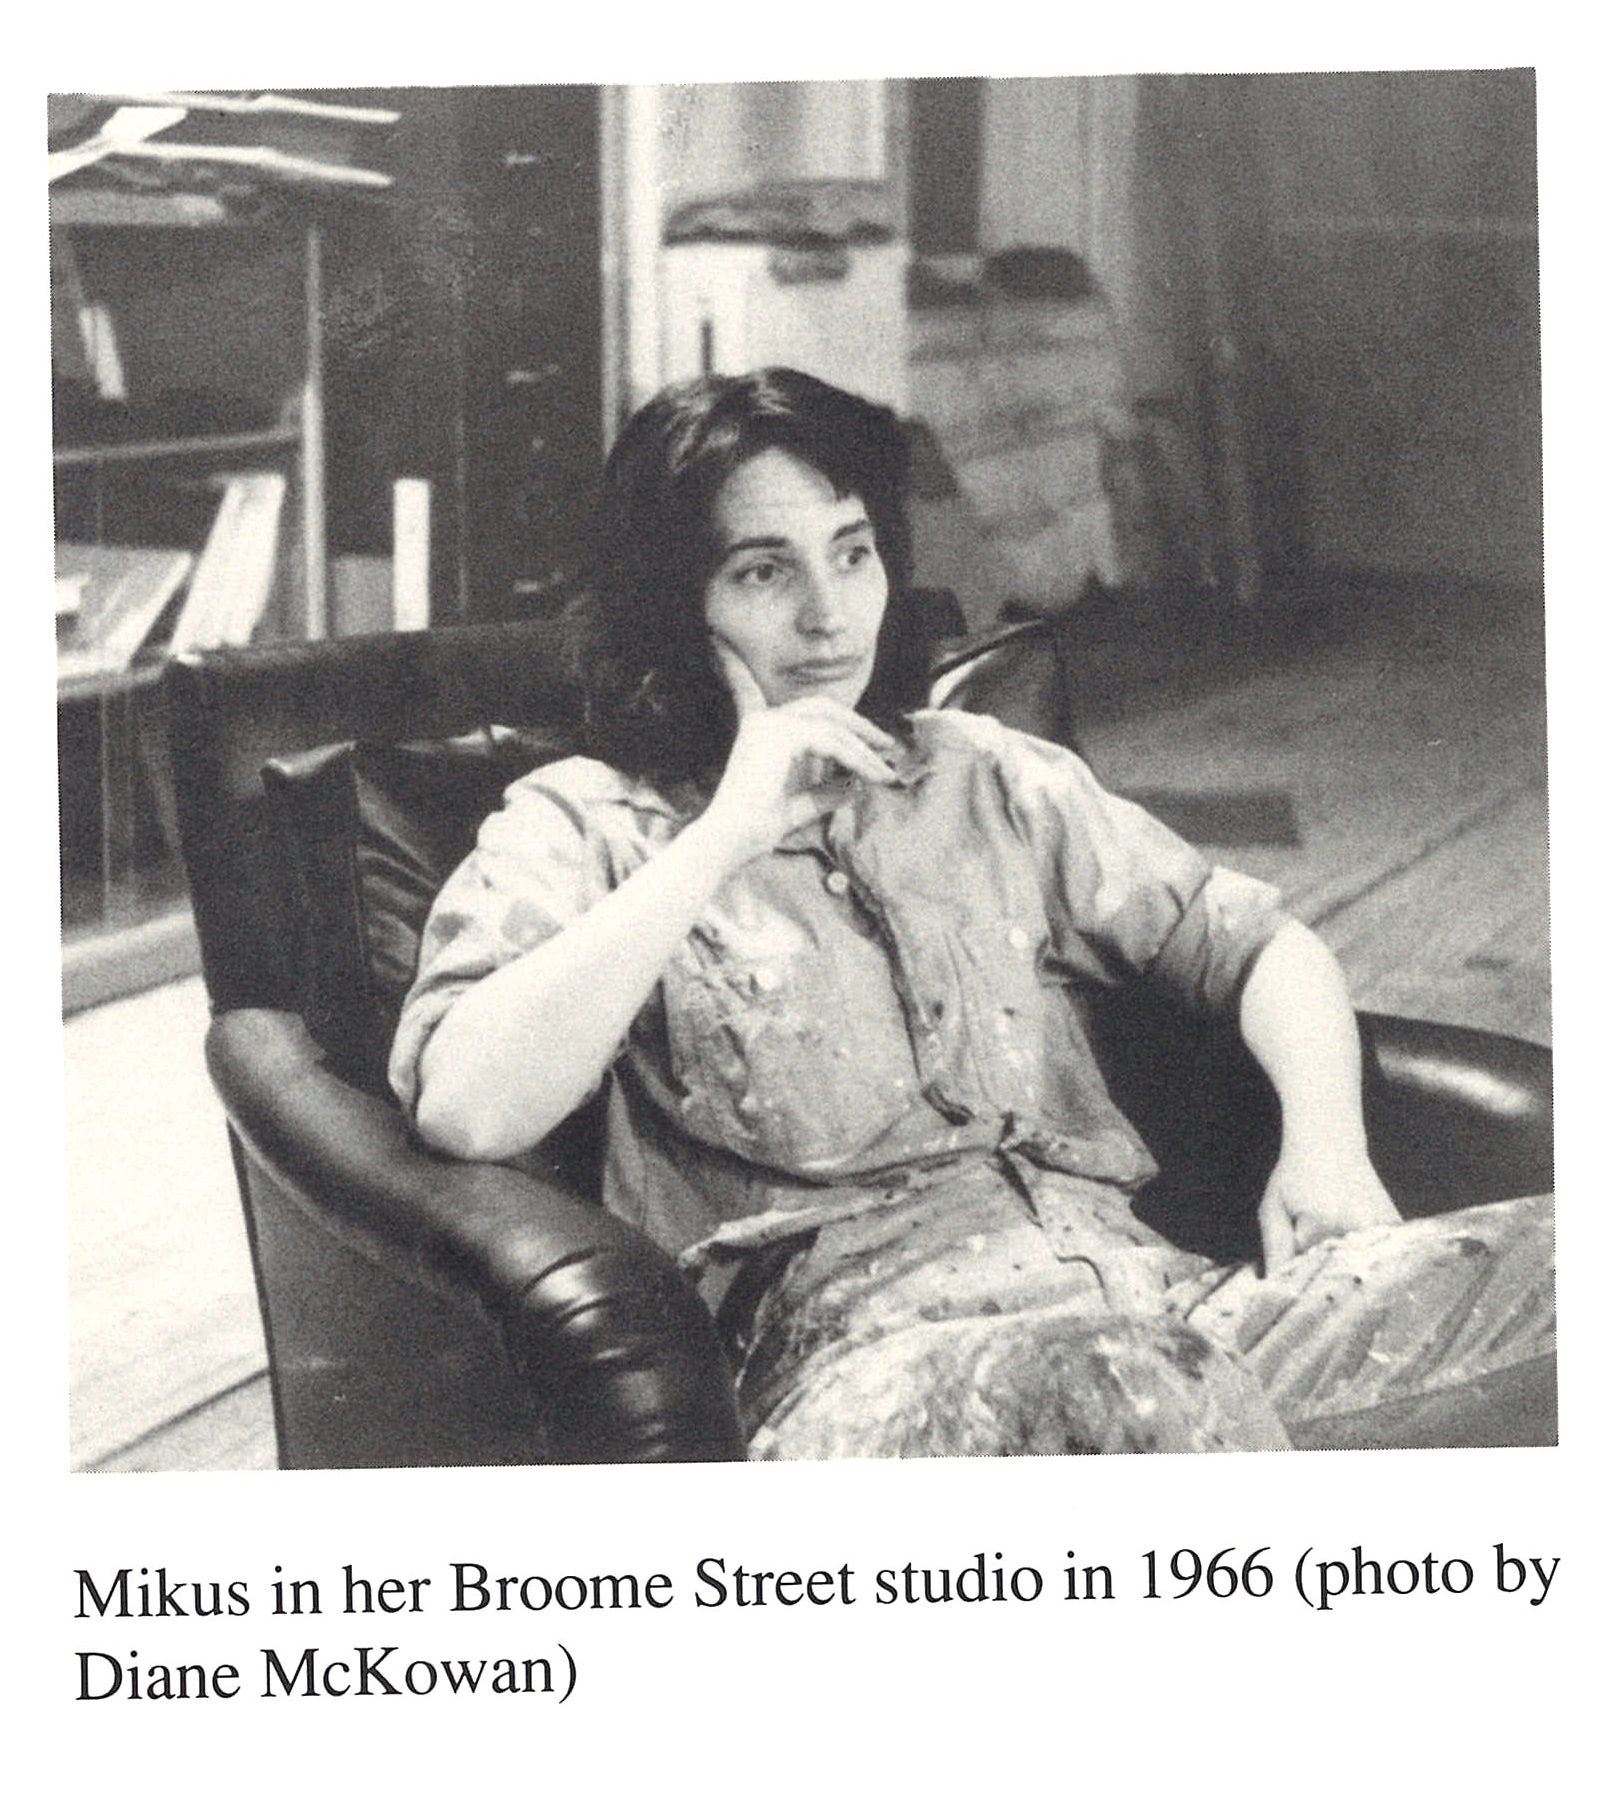 Archival image of Eleanor Mikus sitting in a leather armchair in her Broome Street studio